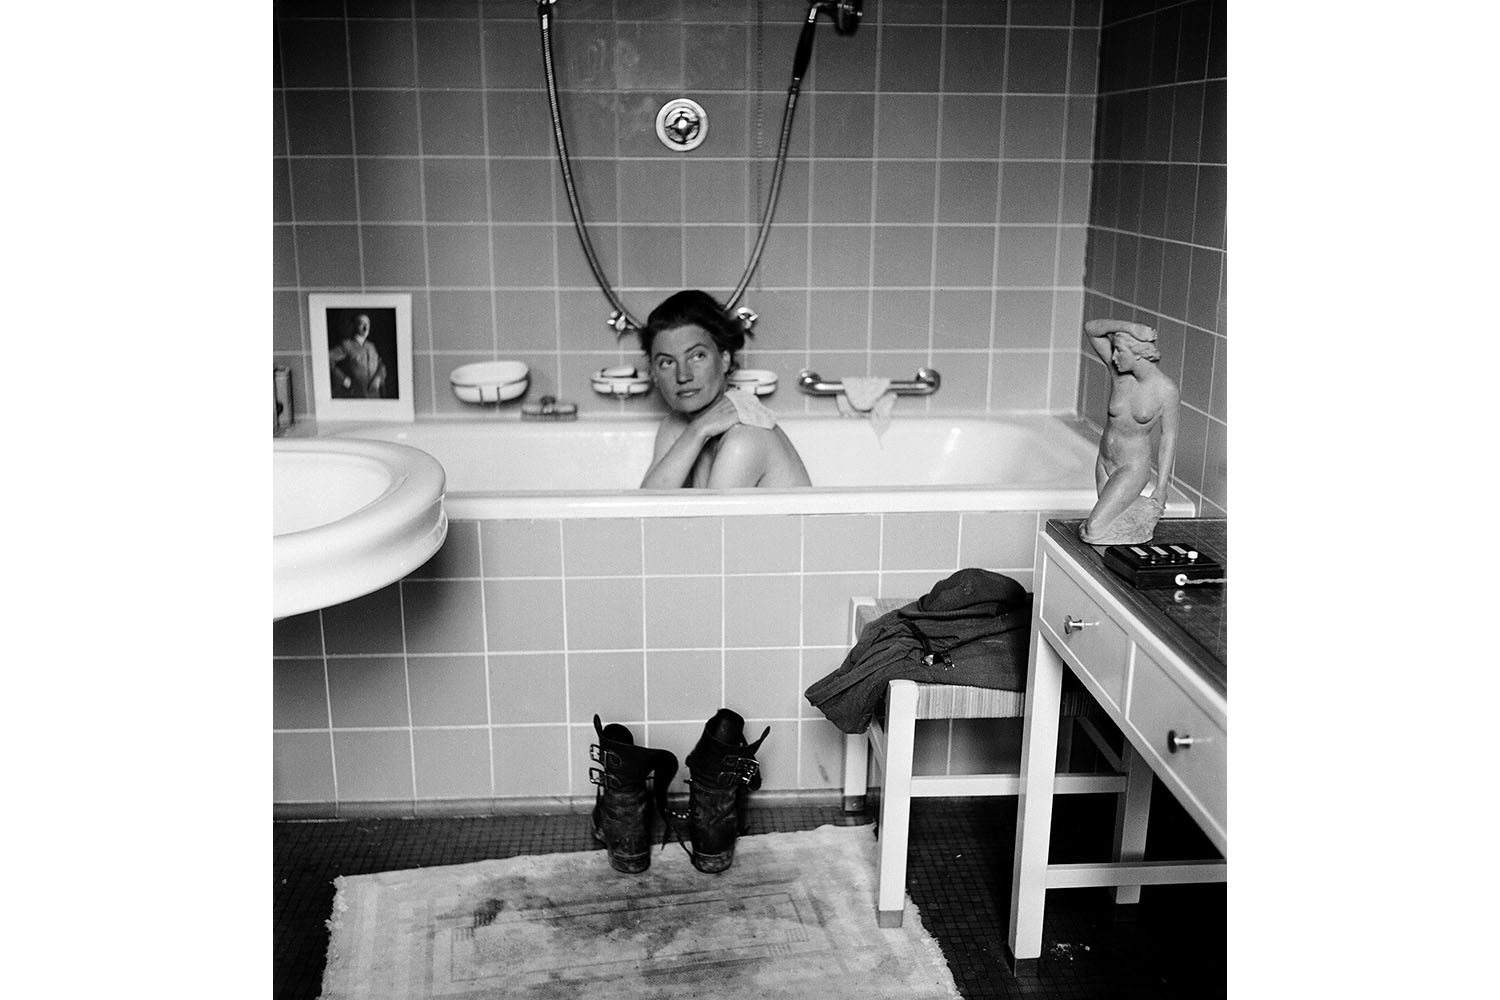 From Lee Miller's War published by Thames &amp; Hudson. Lee Miller in Hitler’s apartment at 16 Prinzregentenplatz. Note the combat boots on the bath mat now stained with the dust of Dachau; and a photograph of the previous owner of the flat propped on the edge of the tub.